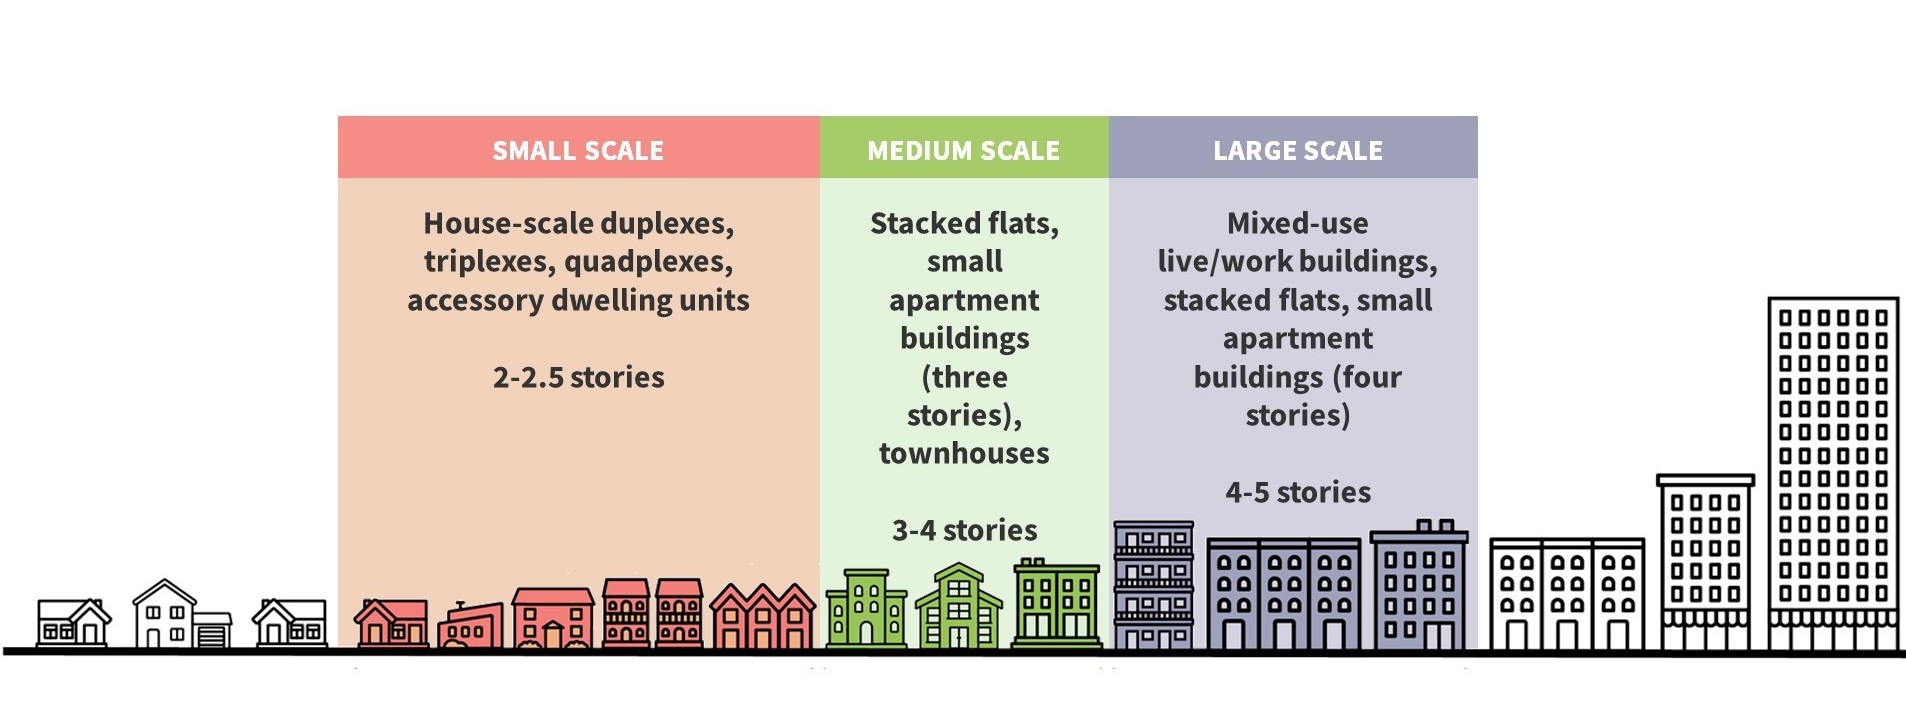 Graphic showing housing scales.Small scale:House-scale duplexes, triplexes, fourplexes, courtyard apartments, bungalow courts, and accessory dwelling units 2-2.5 stories. Medium scale: Stacked flats apartment buildings (three stories), townhouses 3-4 stories. Large scale: Mixed-use Live/work buildings, stacked flats apartment buildings (four stories) 4-5 stories